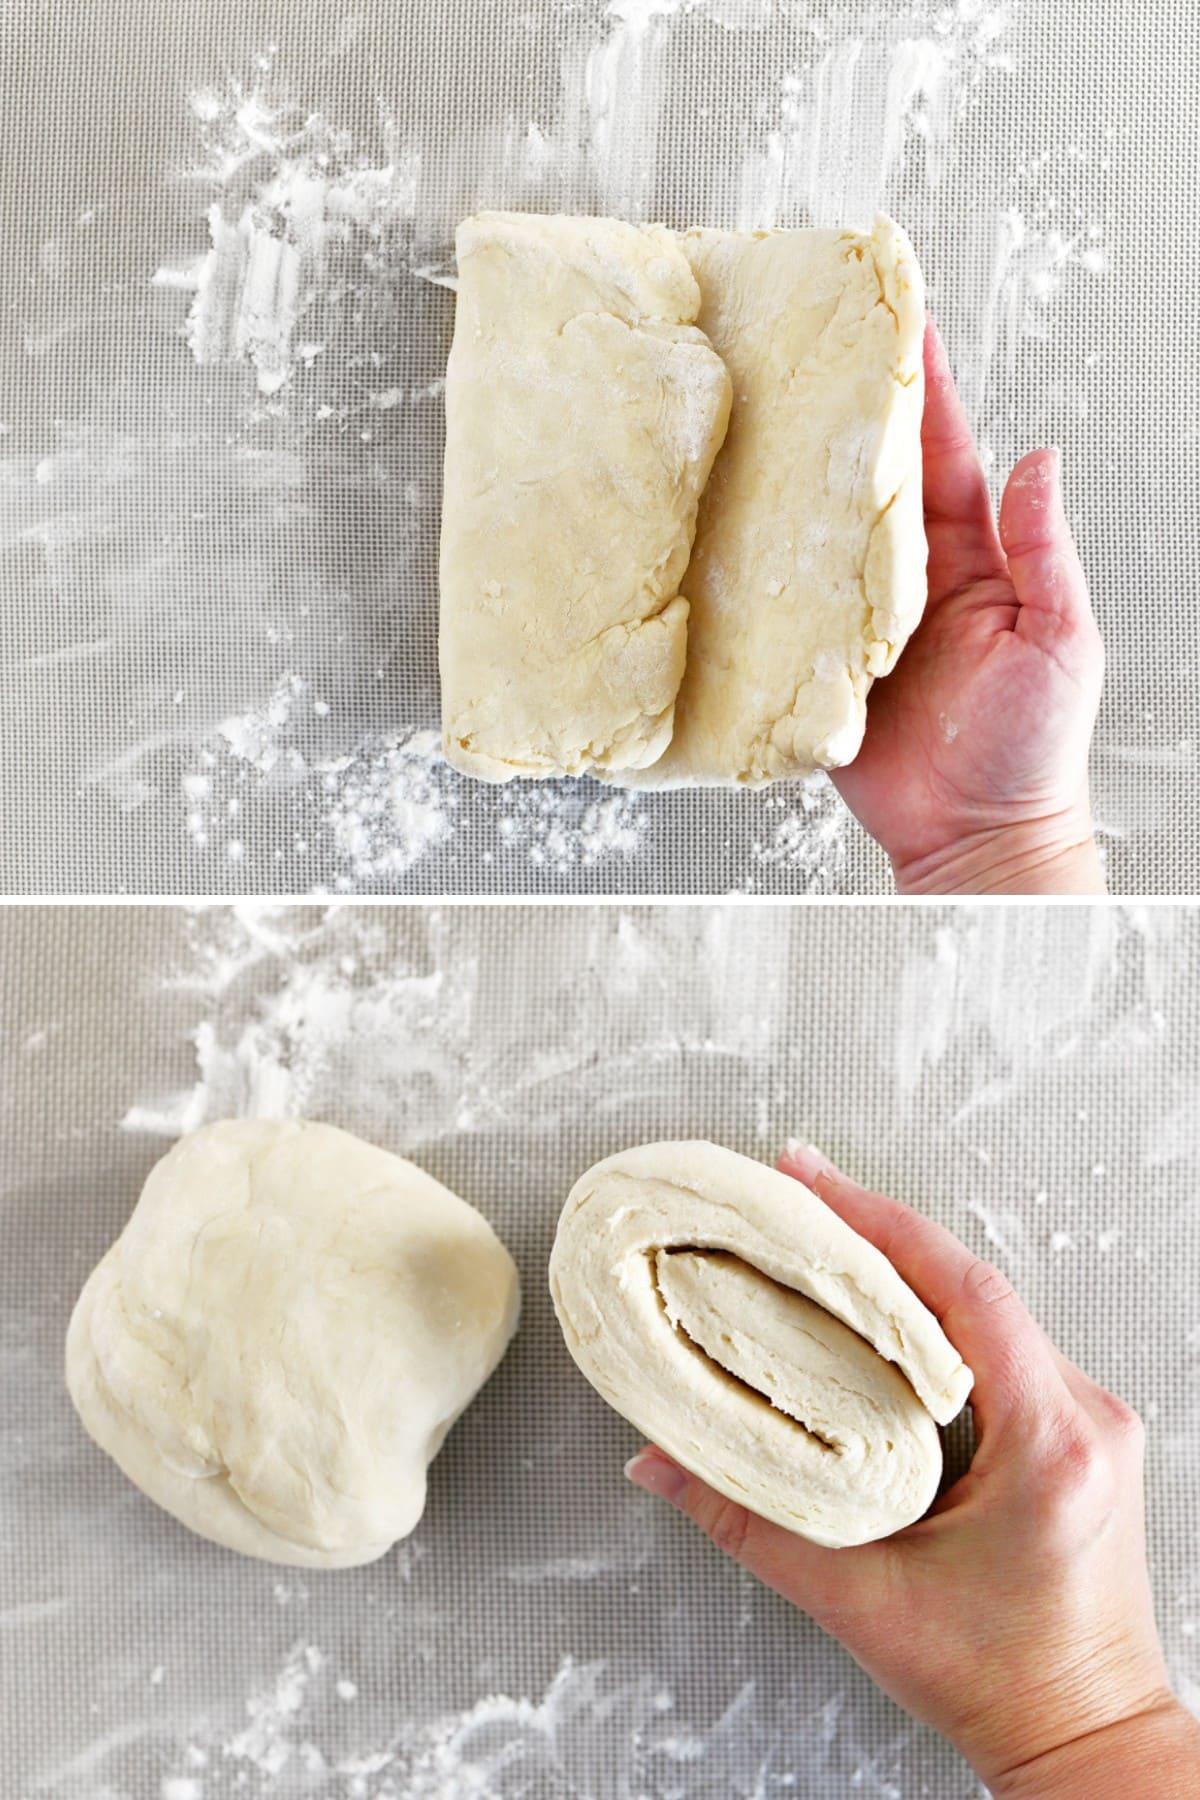 Fold the dough in thirds.